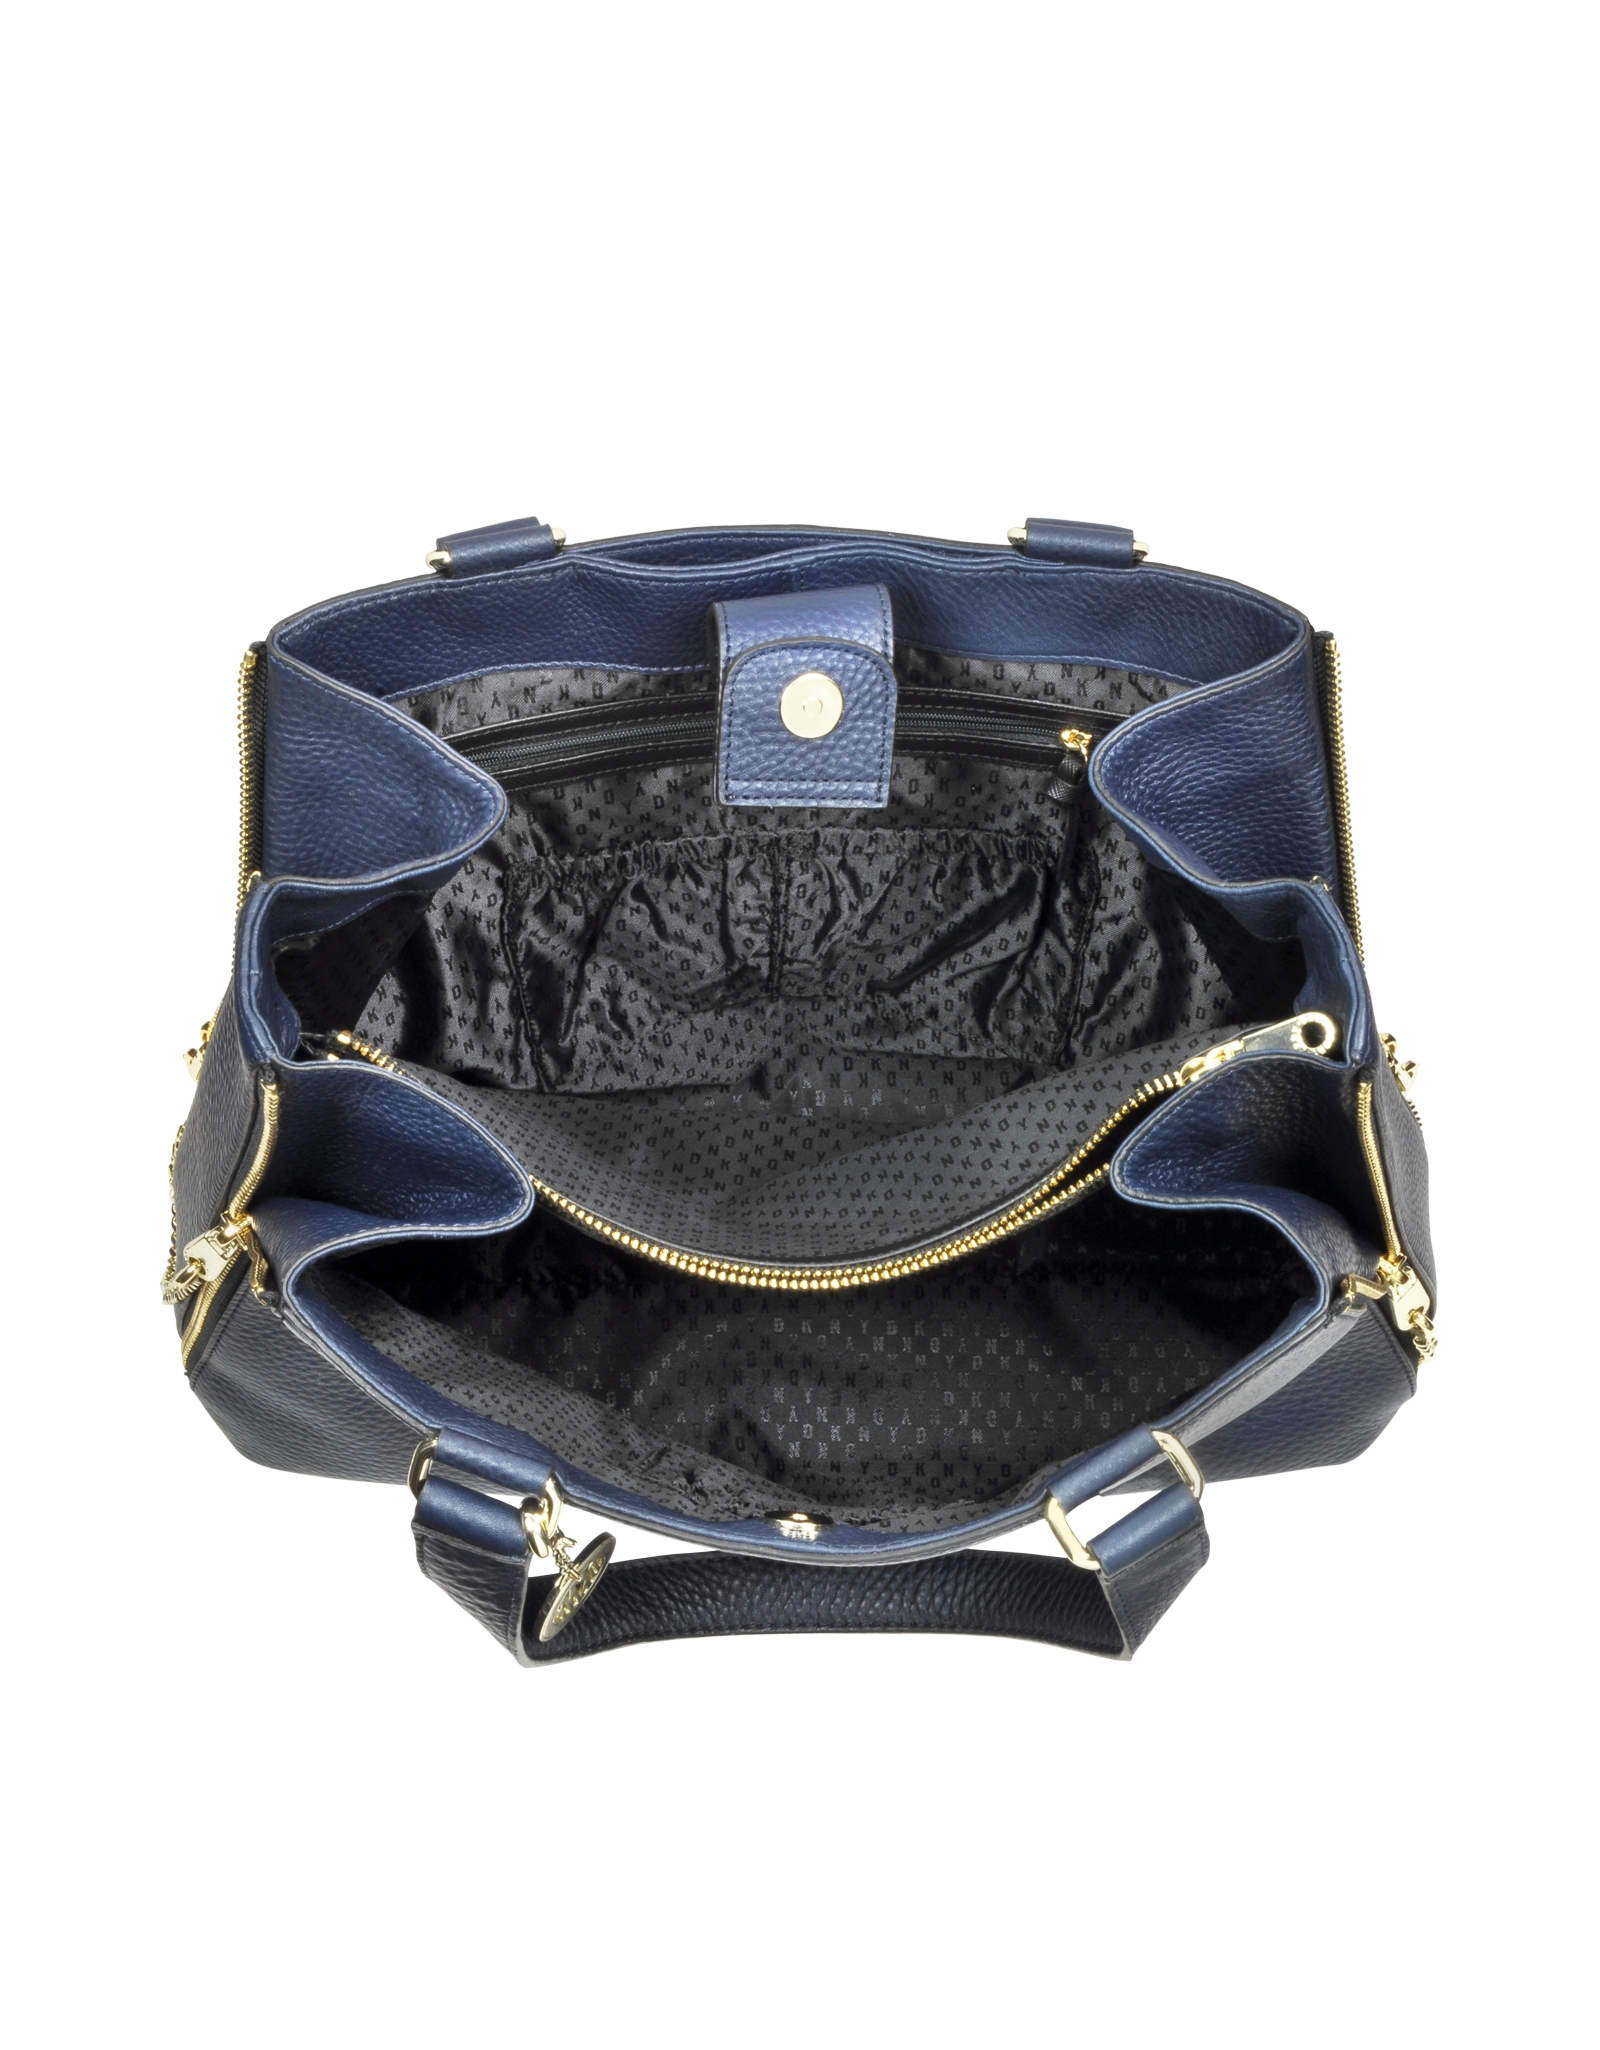 Lyst - DKNY Tribeca Large Navy Blue Leather Tote Bag in Blue